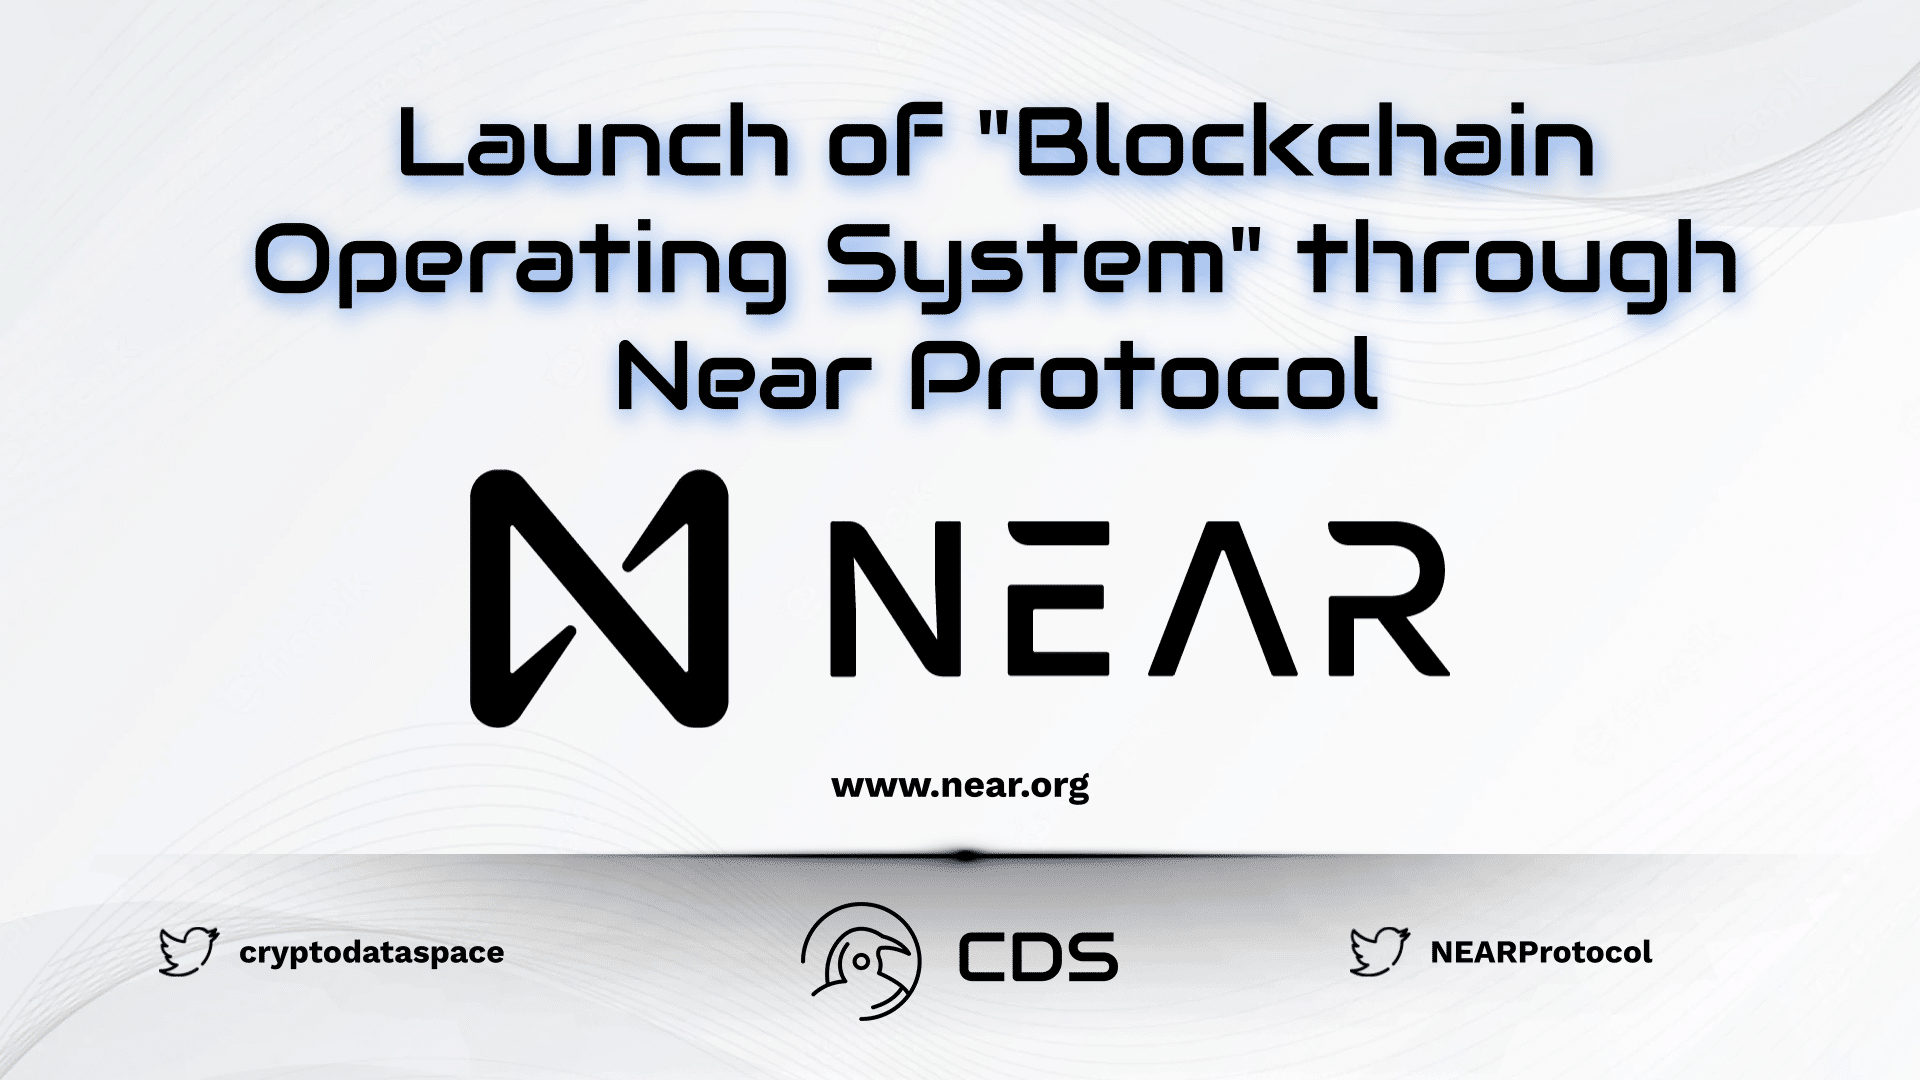 Launch of Blockchain Operating System through Near Protocol